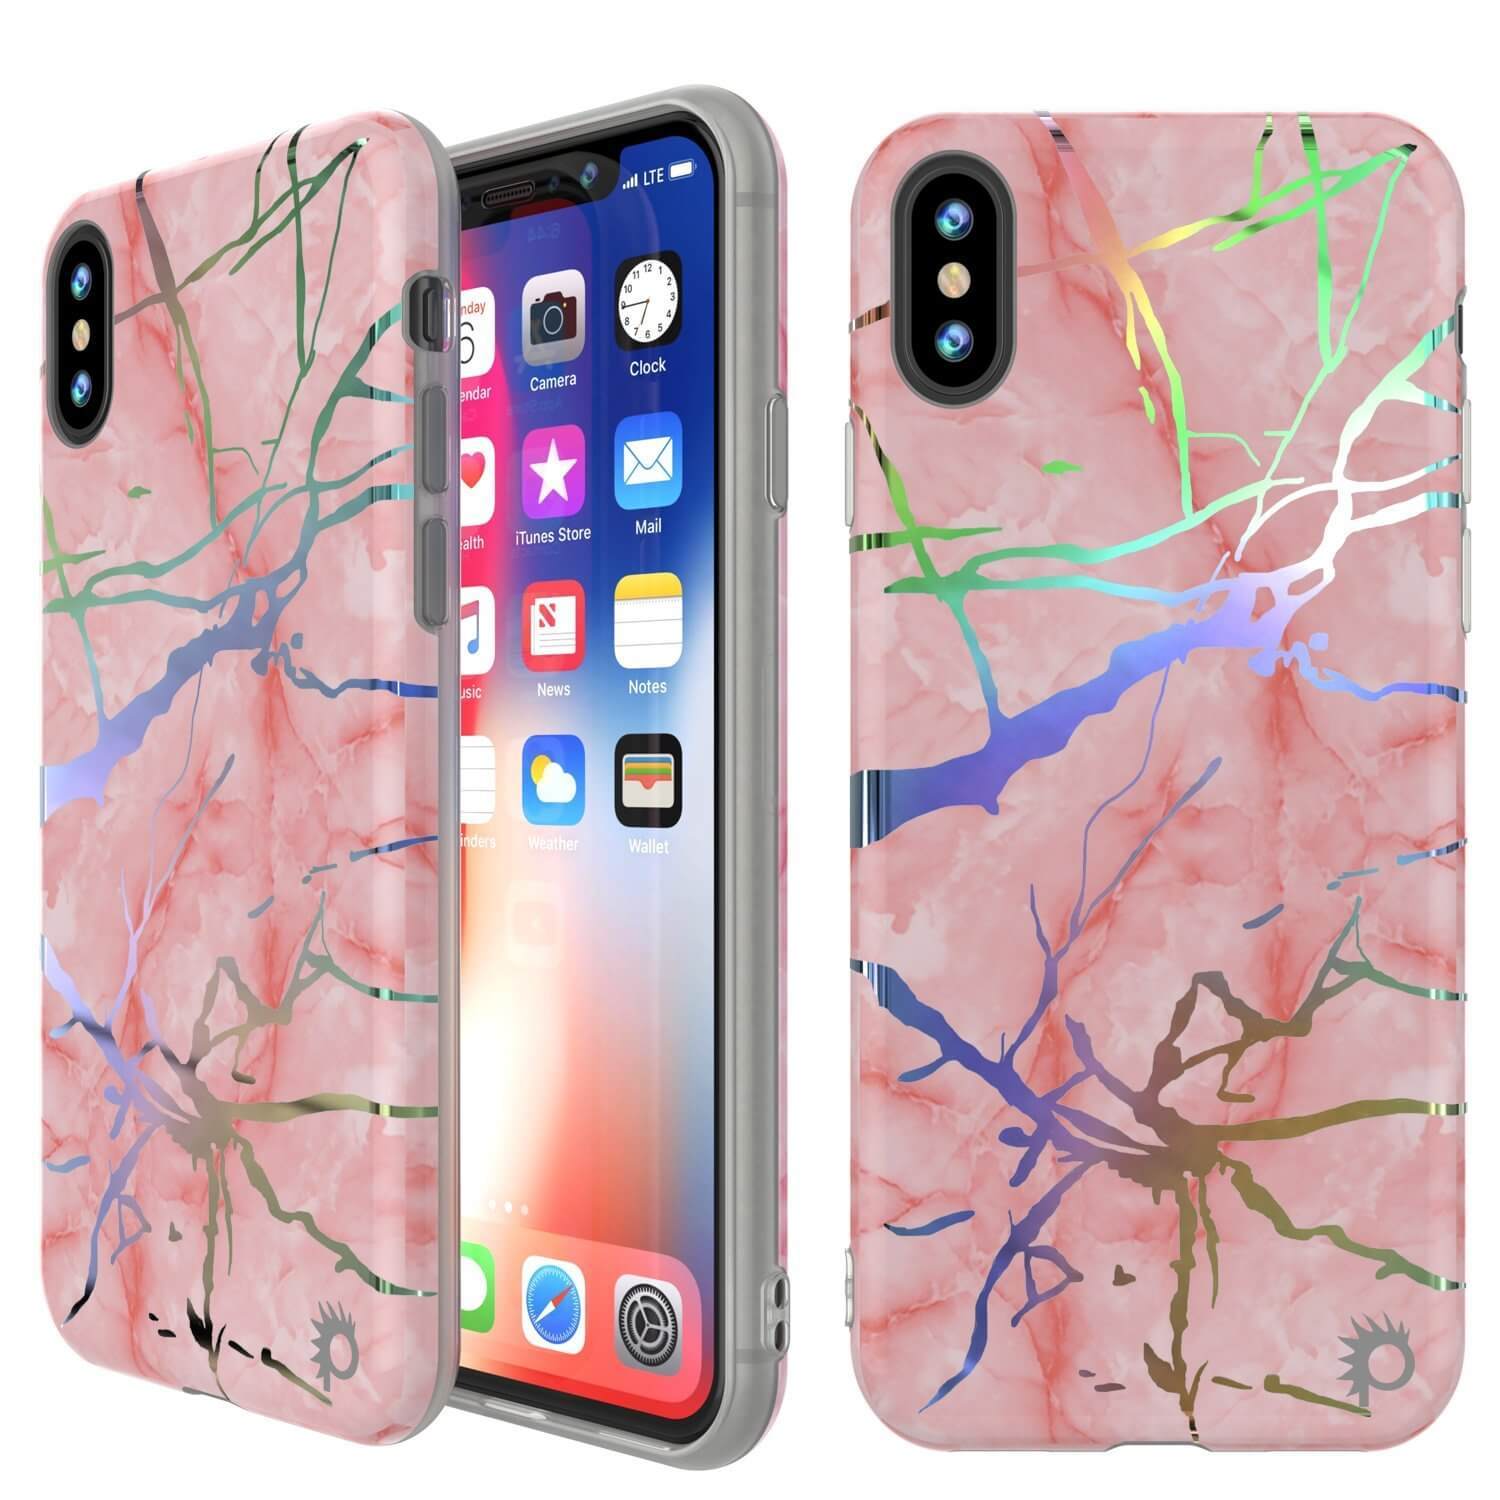 Punkcase iPhone X Marble Case, Protective Full Body Cover W/9H Tempered Glass Screen Protector (Rose Gold Mirage) - PunkCase NZ